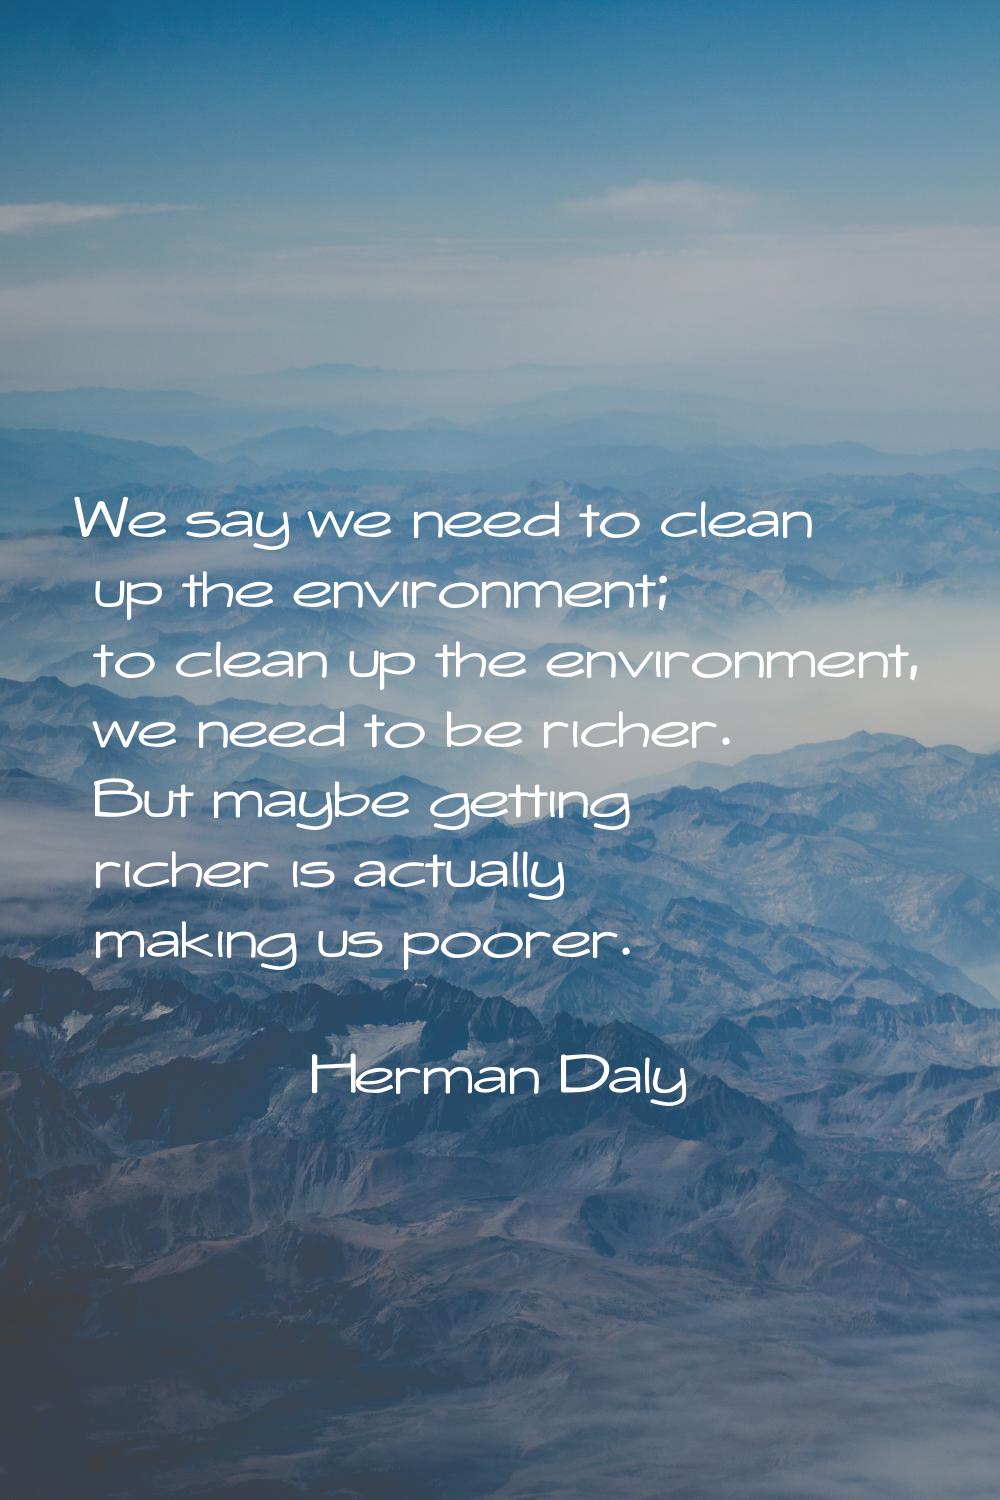 We say we need to clean up the environment; to clean up the environment, we need to be richer. But 